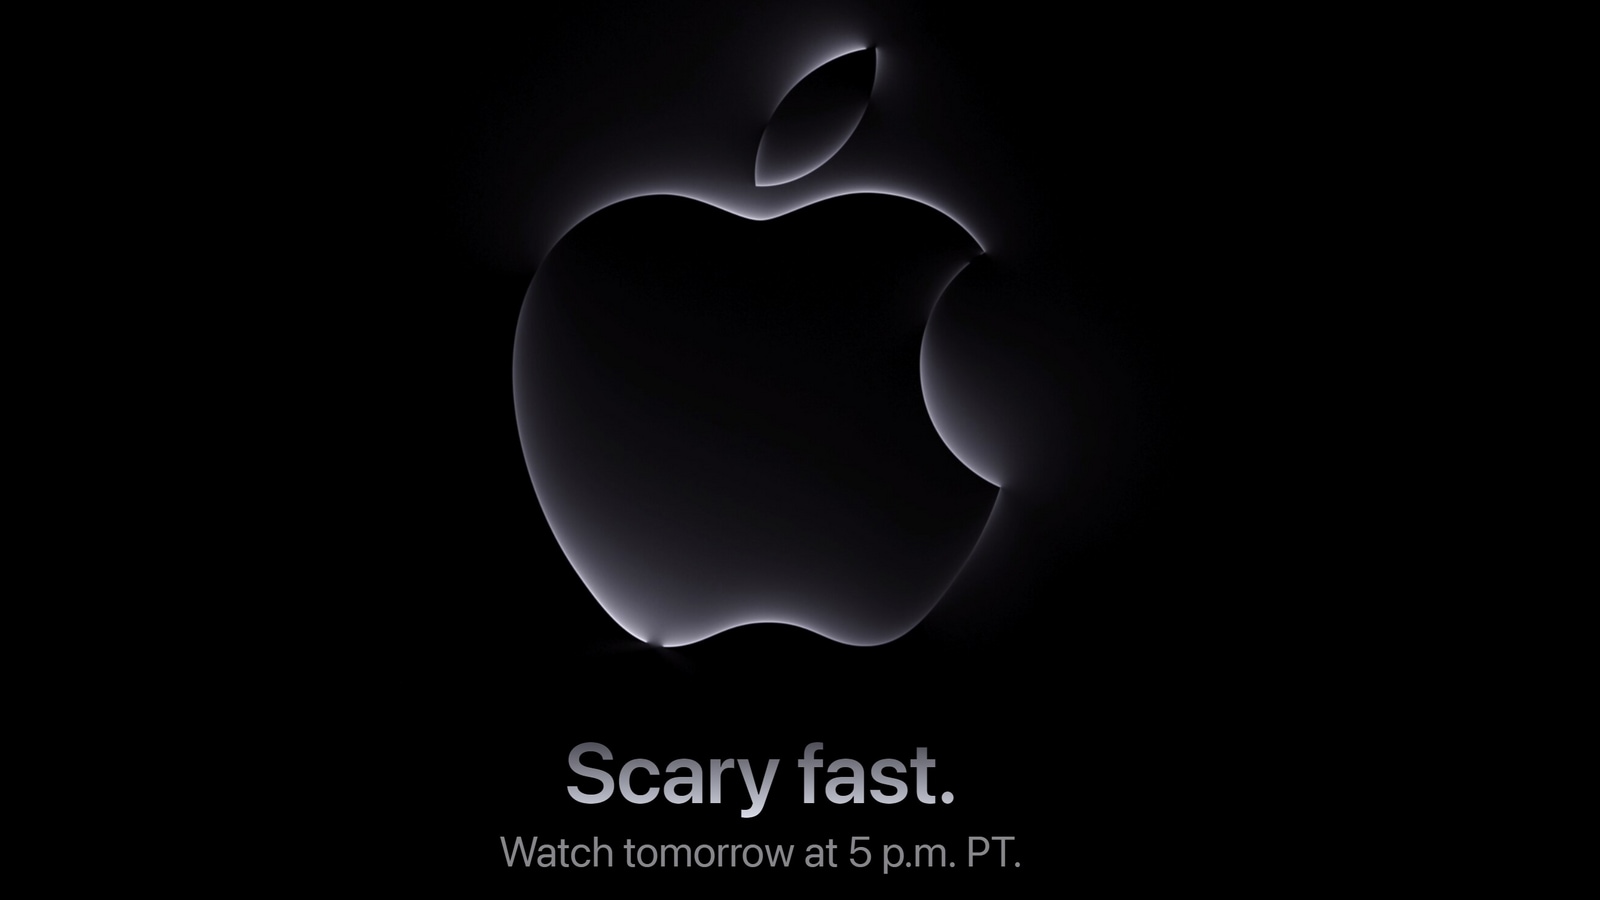 What is Apple’s Scary Fast event? From meaning to expected launches, know it all here